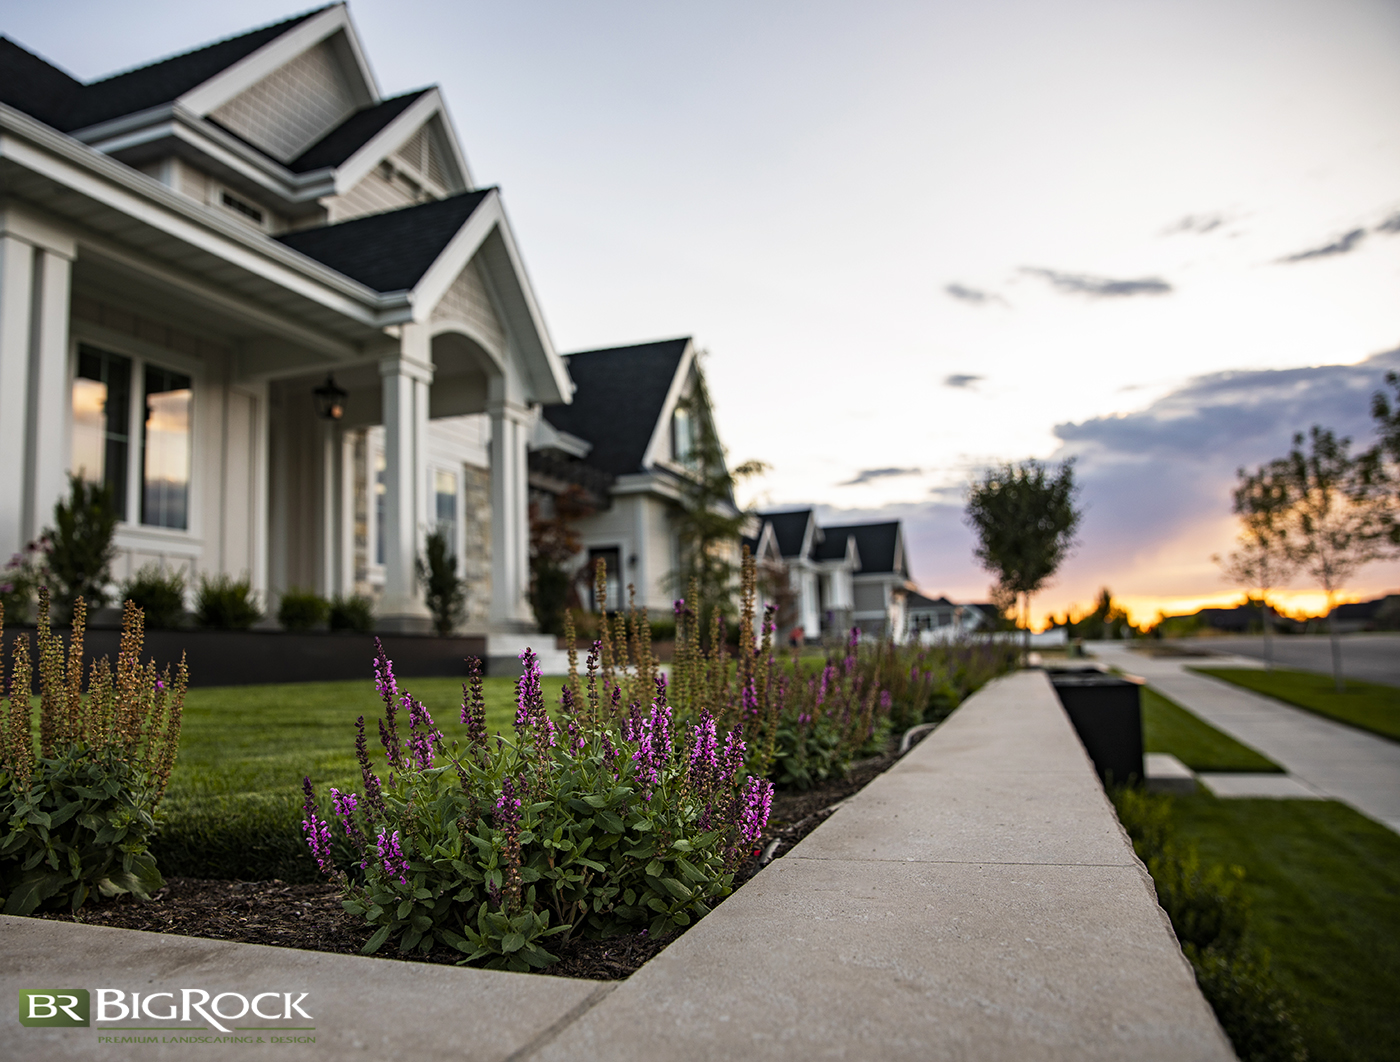 Big Rock Landscaping will help you choose the proper landscaping plants for your location and yard maintenance needs.